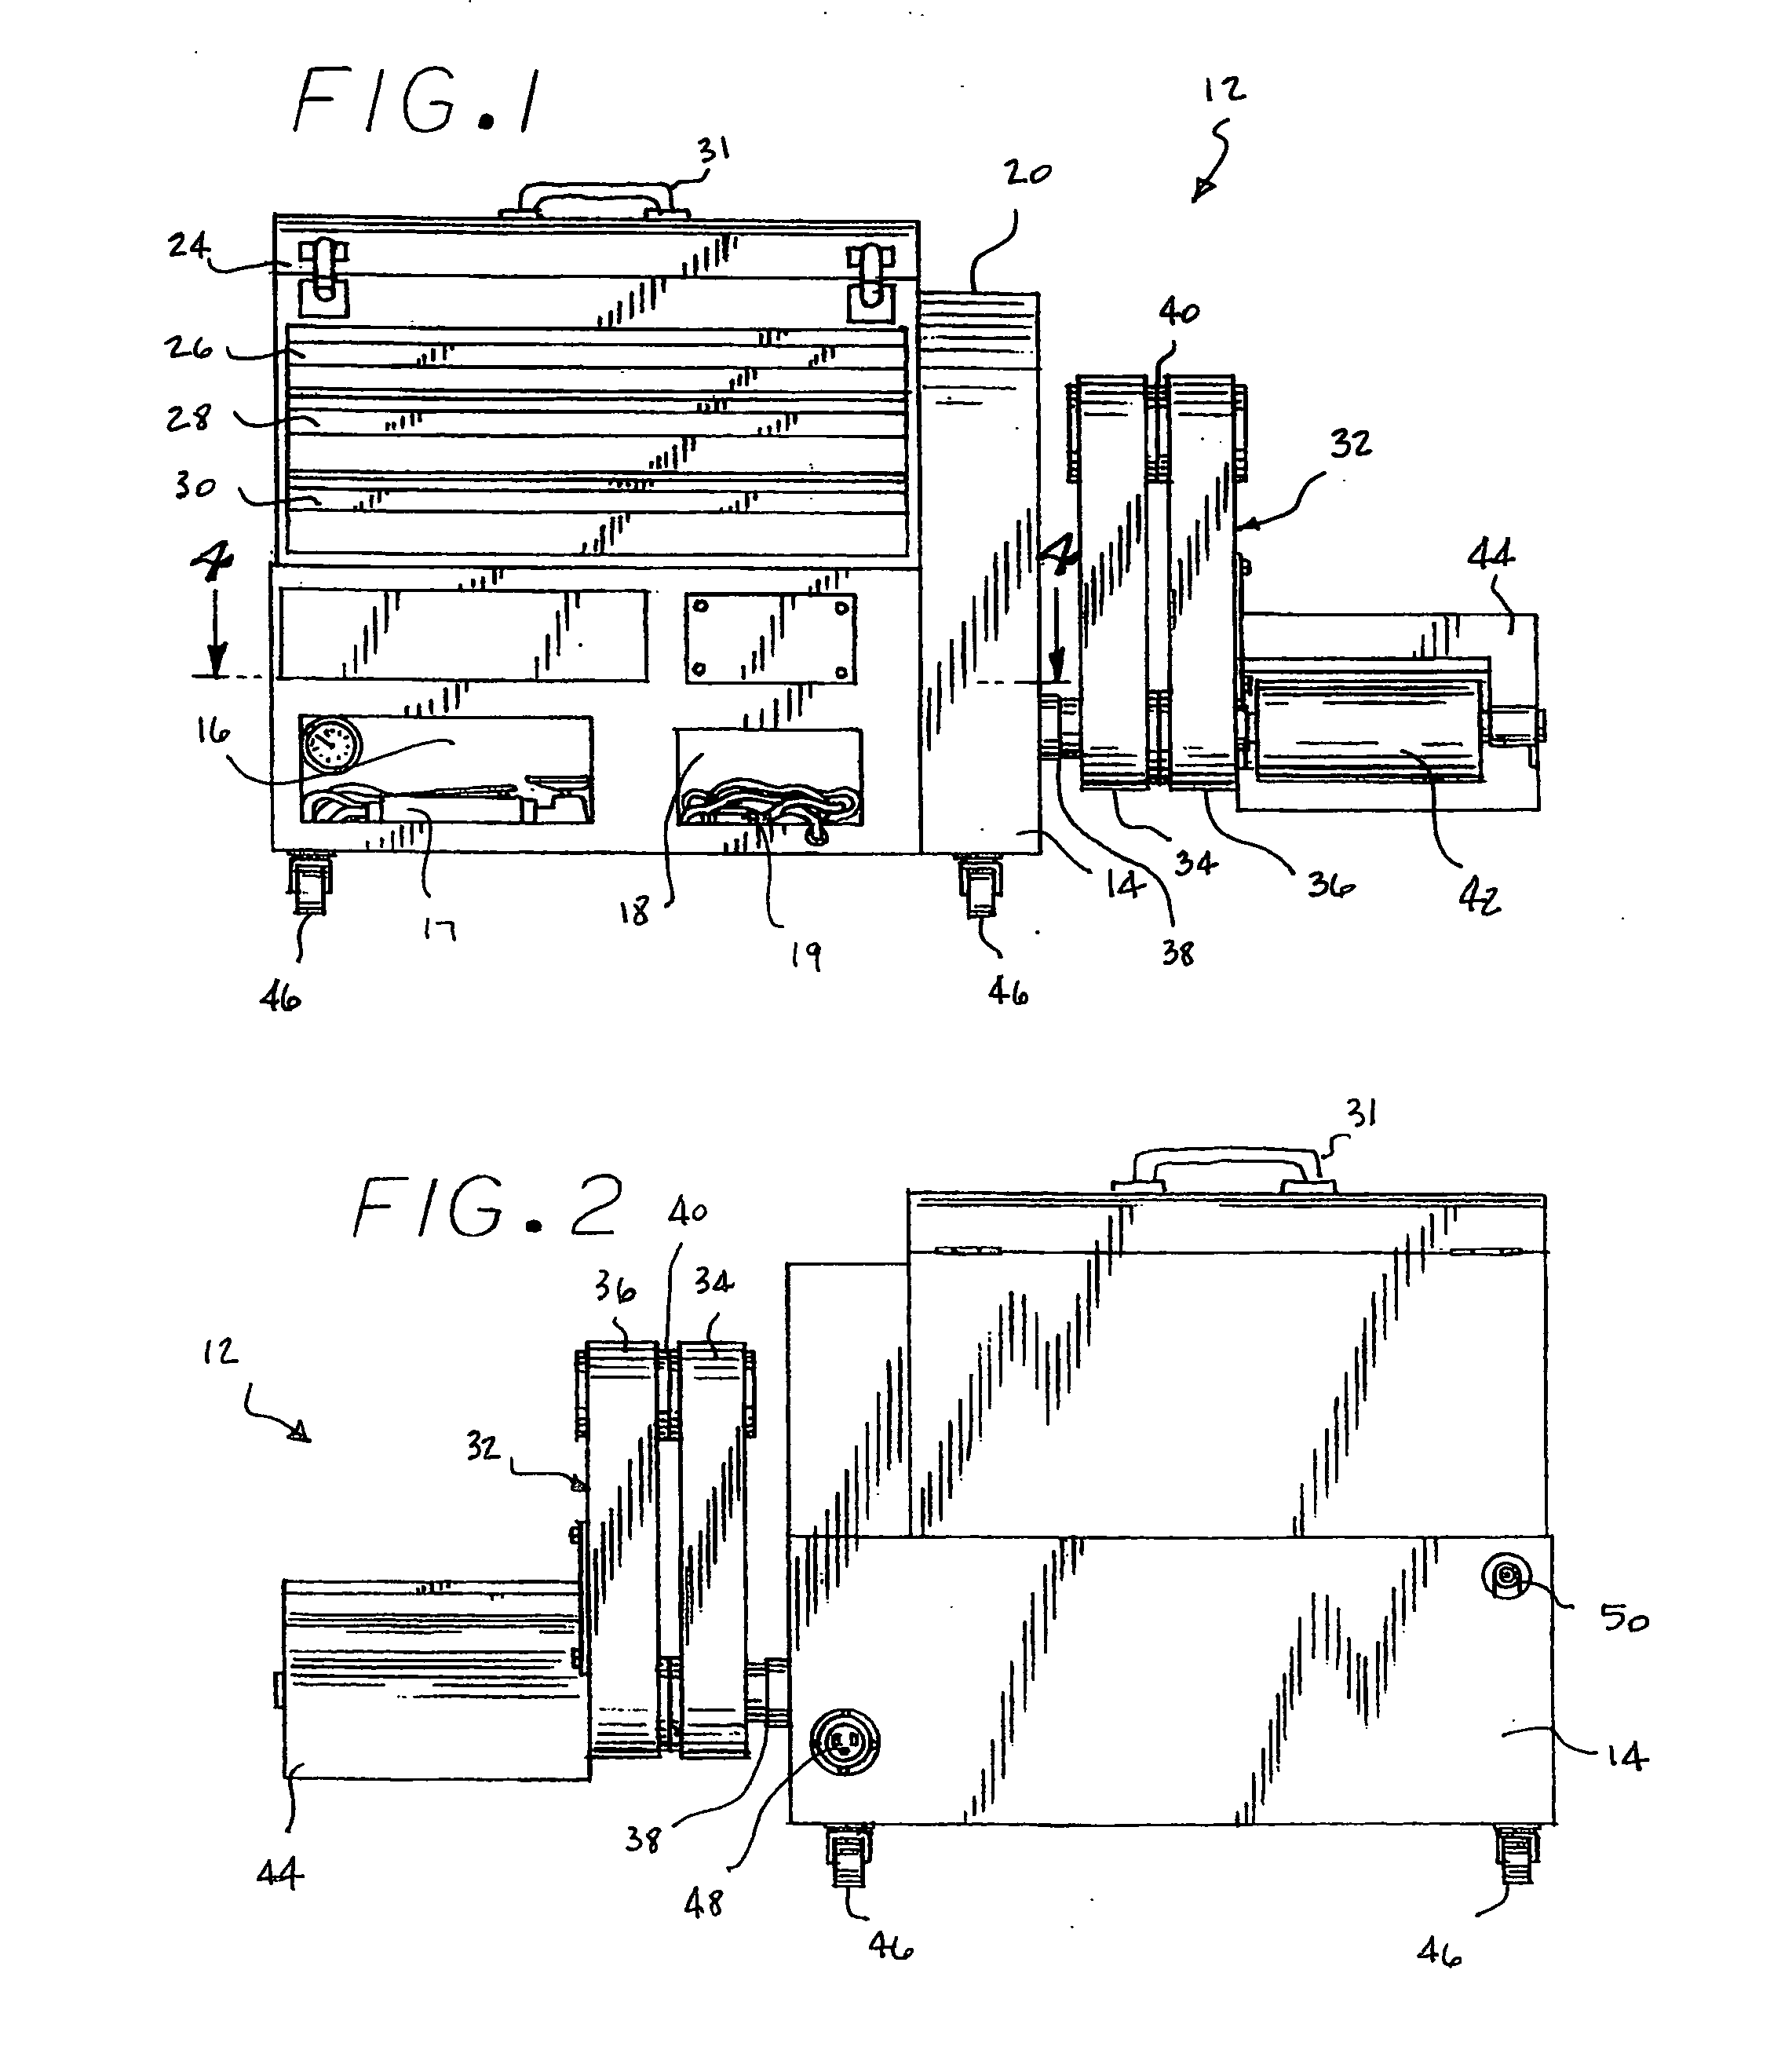 Wheel reconditioning station and method of use